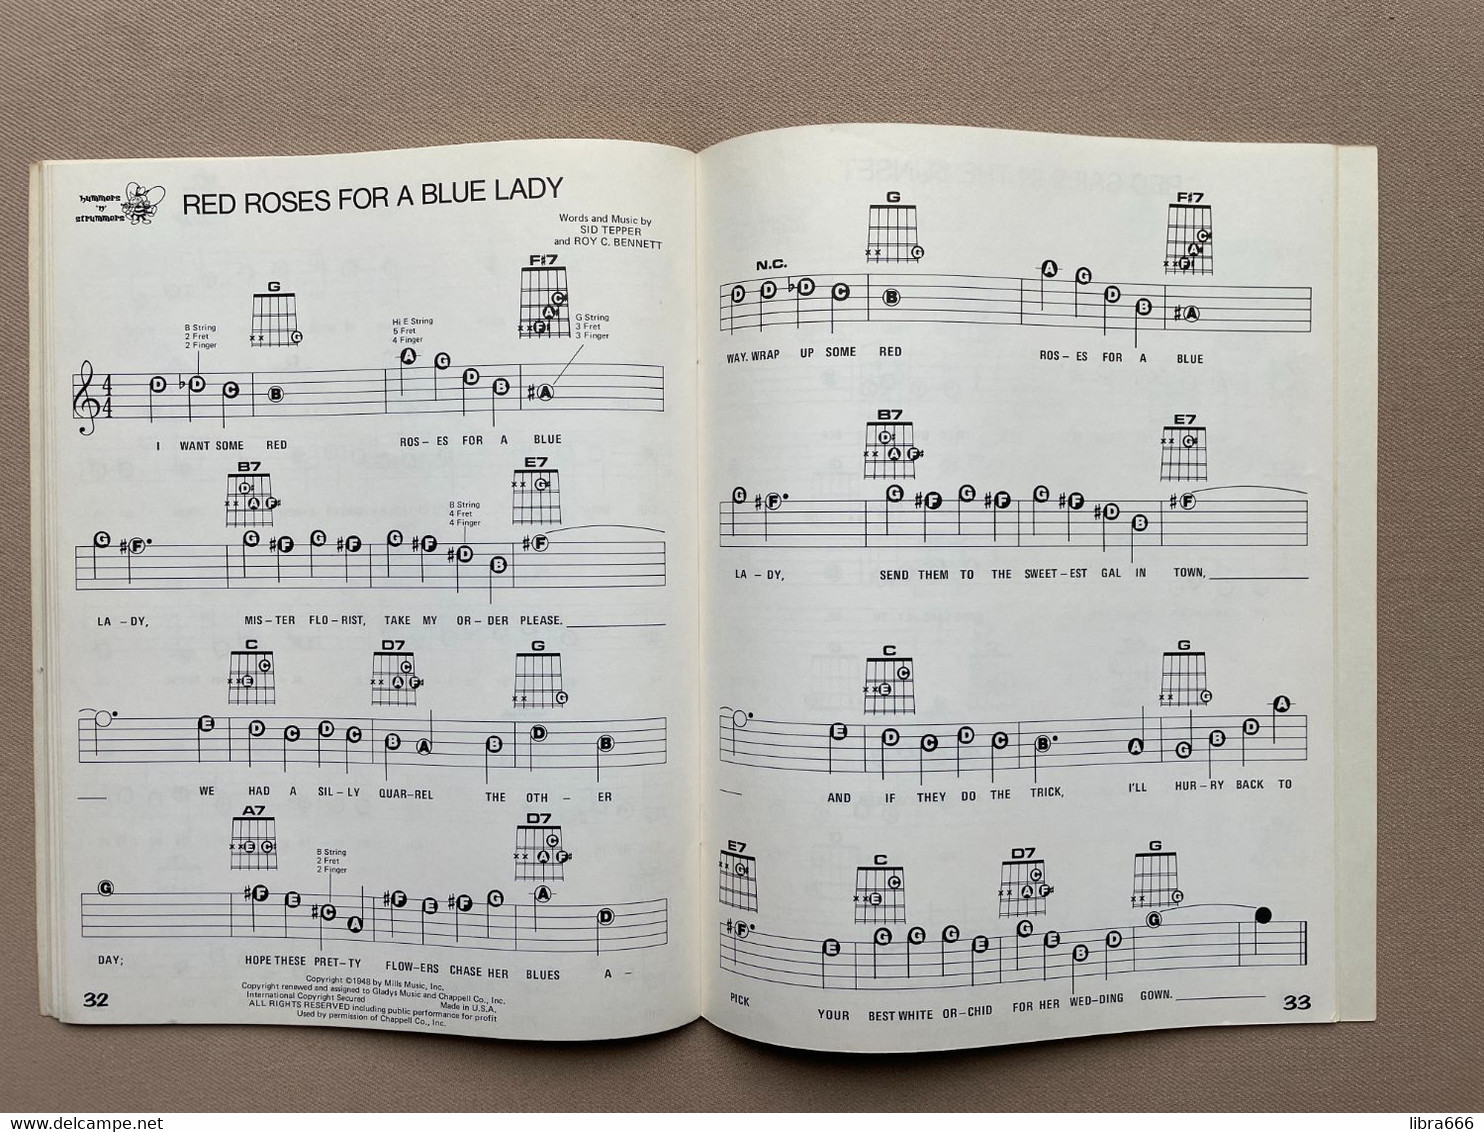 EASY-PLAY - GUITAR SPEED MUSIC 12 / GOLDEN POPS 1977 (19 songs - 48 pages)